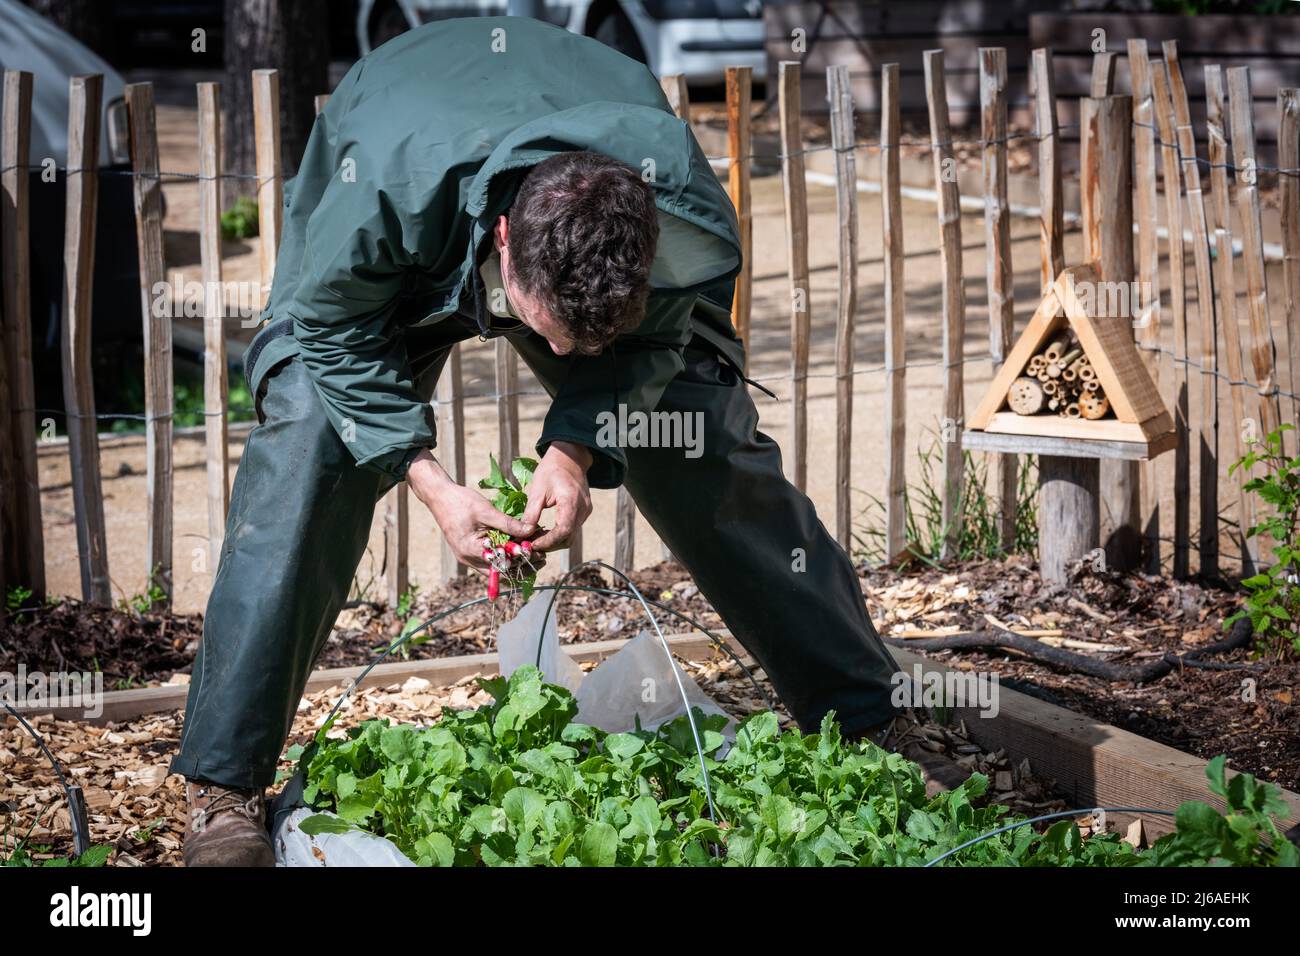 Philippe, an urban market gardener, sows seeds in the soil of his urban farm near buildings Stock Photo